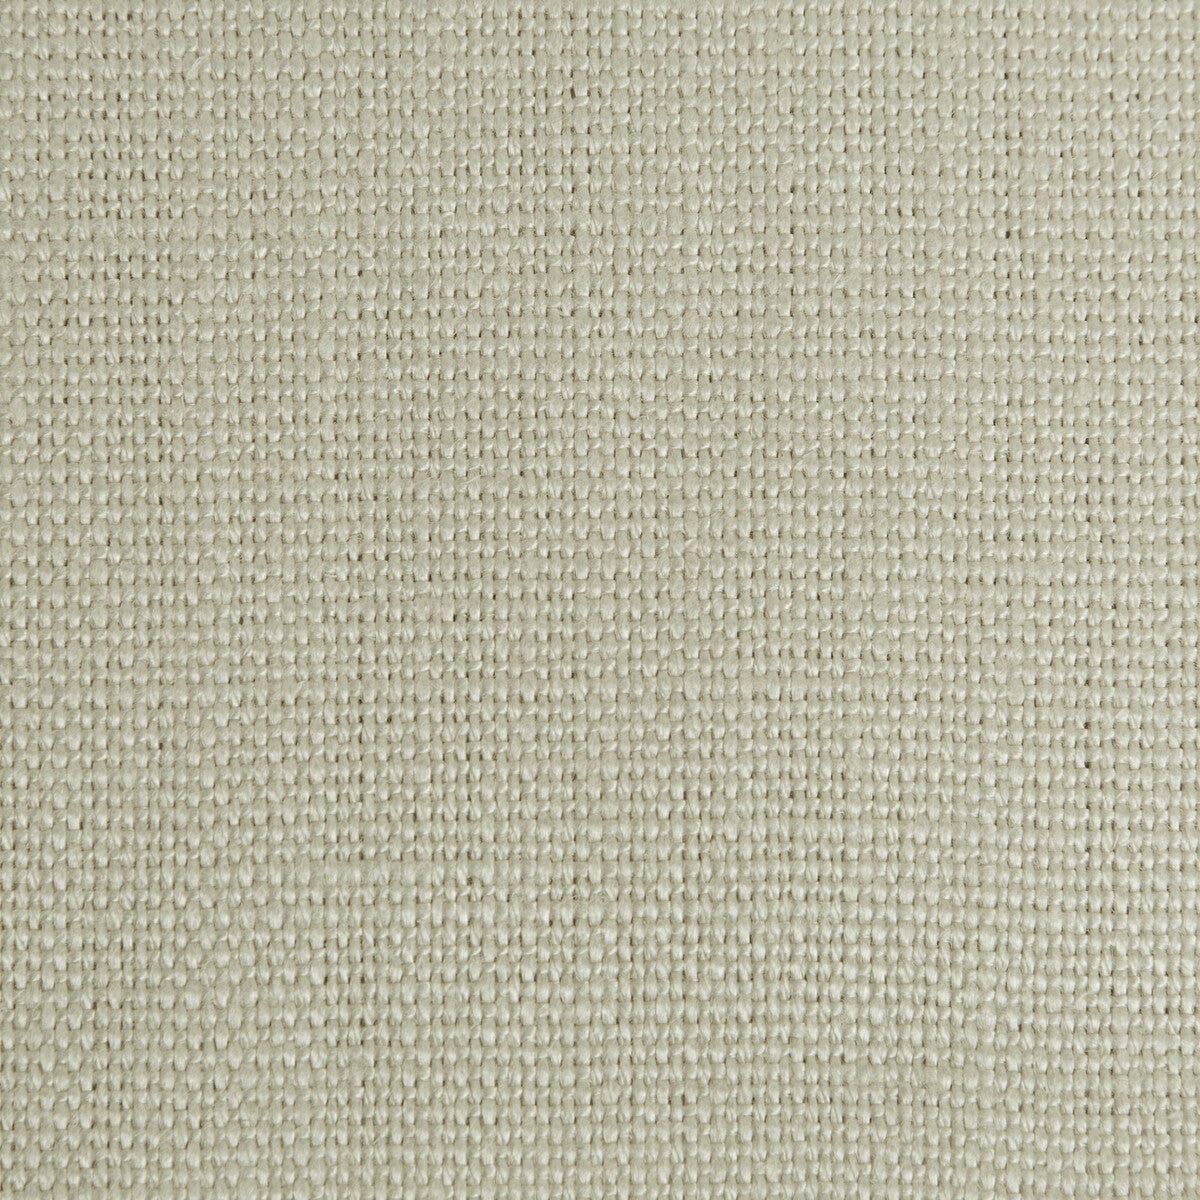 Kravet Couture fabric in 34813-2211 color - pattern 34813.2211.0 - by Kravet Couture in the Mabley Handler collection